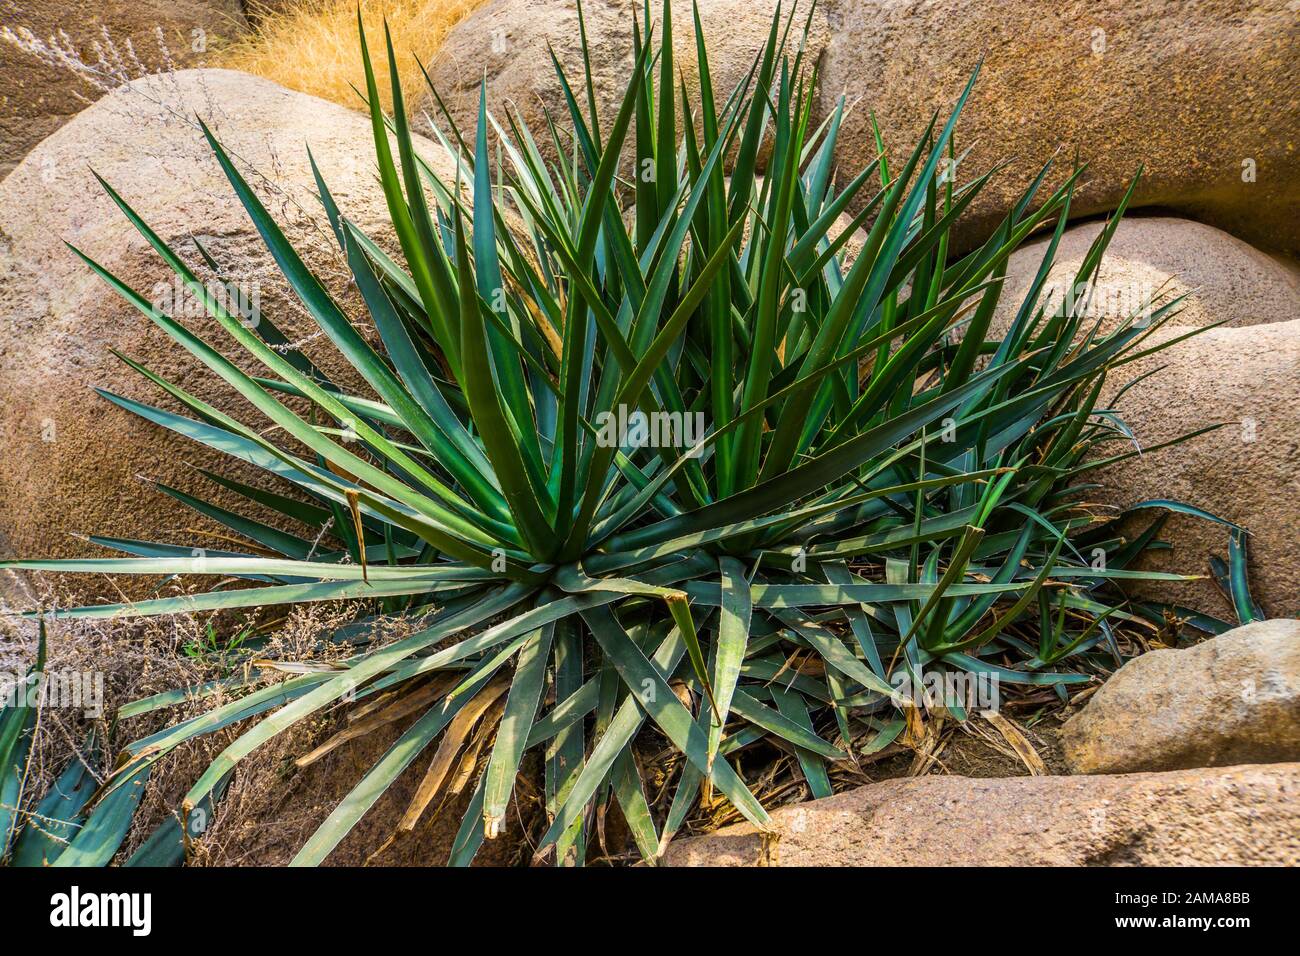 Agave sisalana plant in closeup, known as sisal in mexico, Popular tropical plant specie Stock Photo